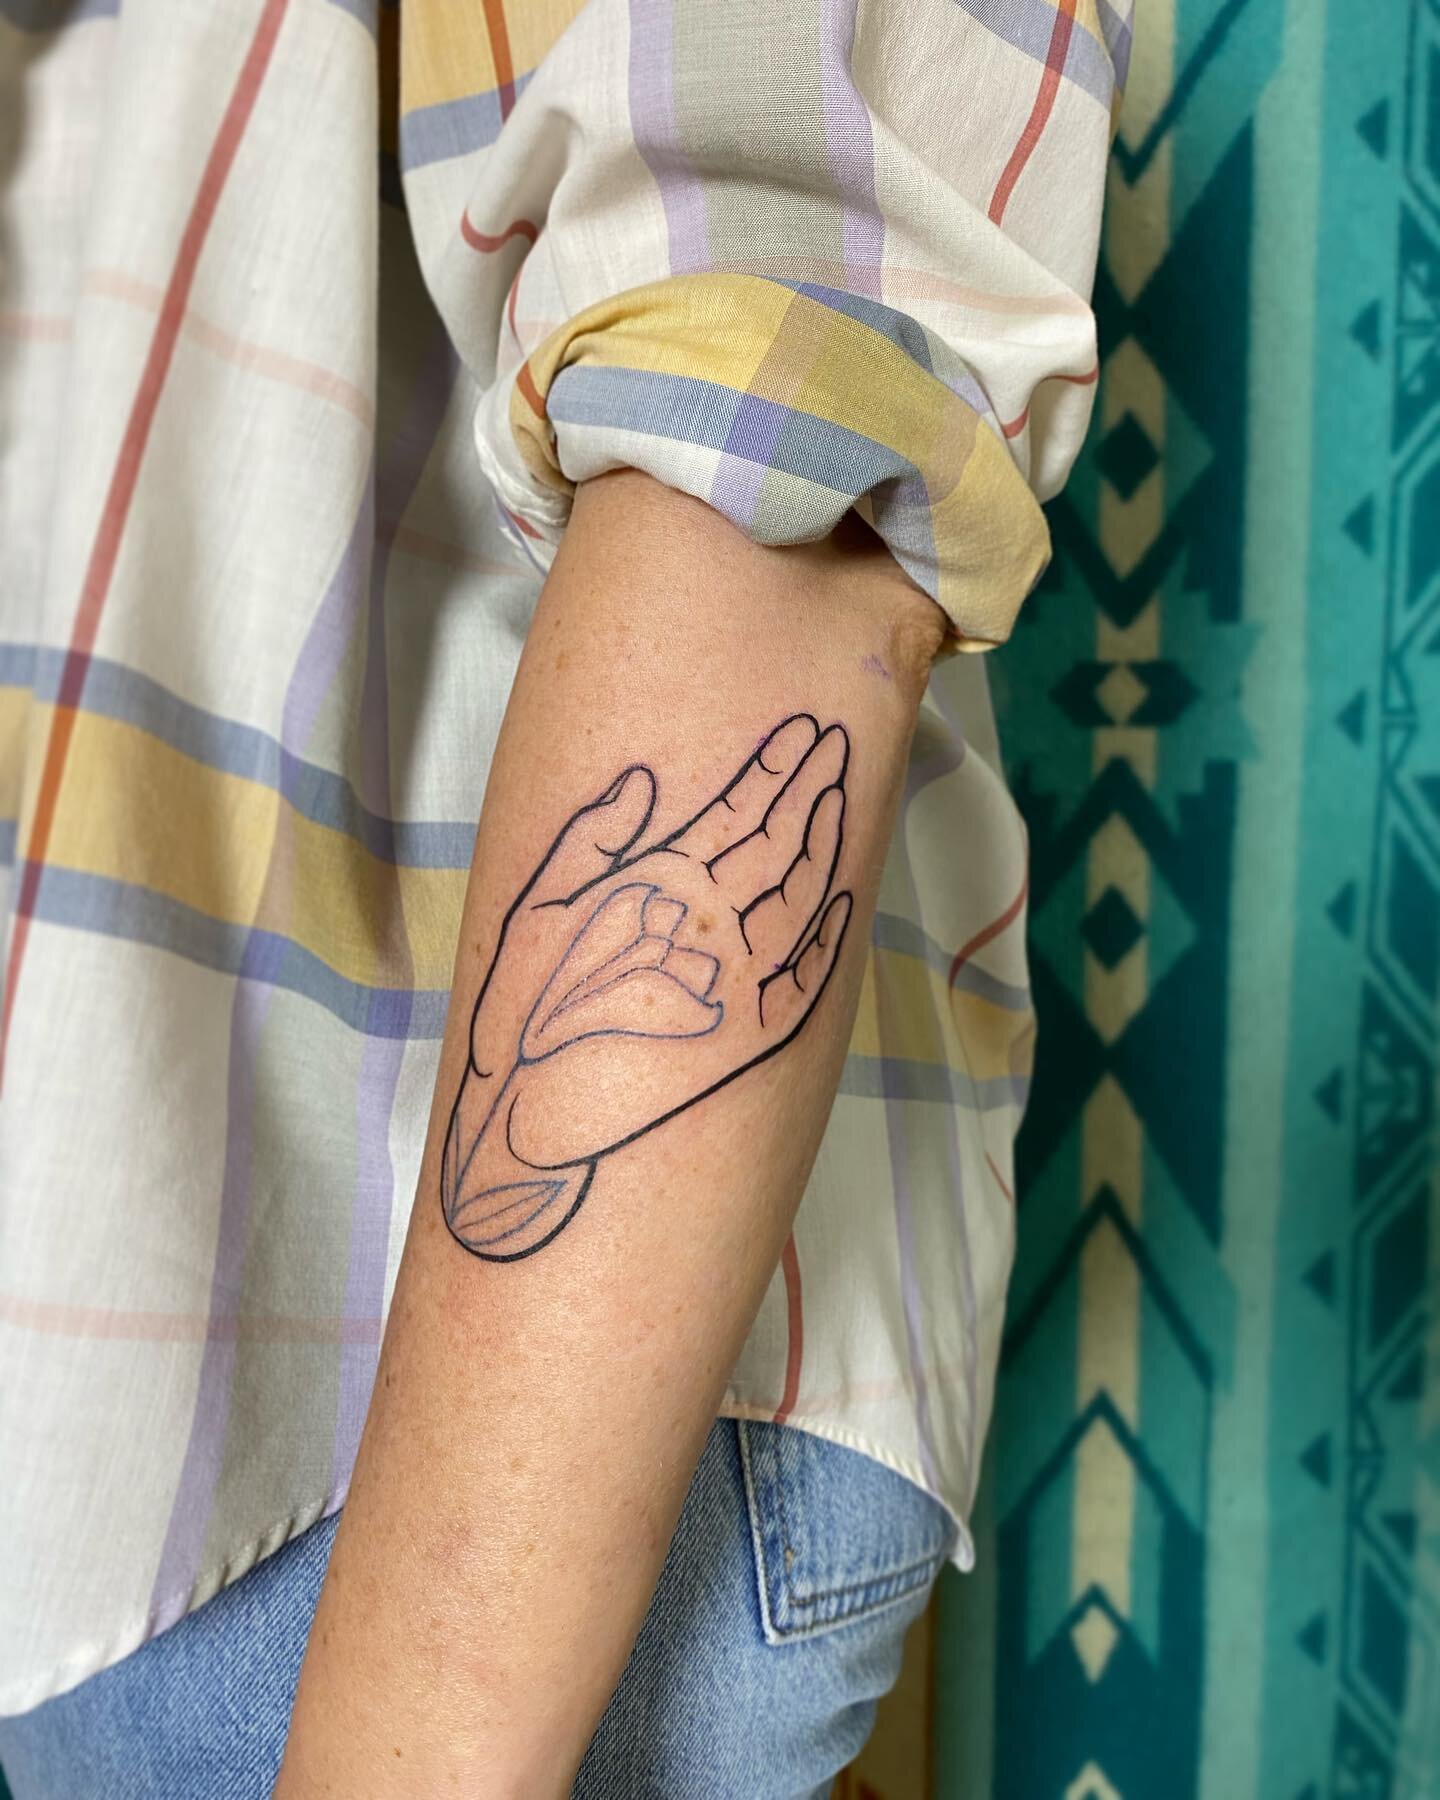 Huge thanks to Lauren for coming in last minute to get this cute lil hand flash, and for being up for adding some color linework! Your freckle was meant to be the floating apex of the flower✨it was clearly waiting for you!